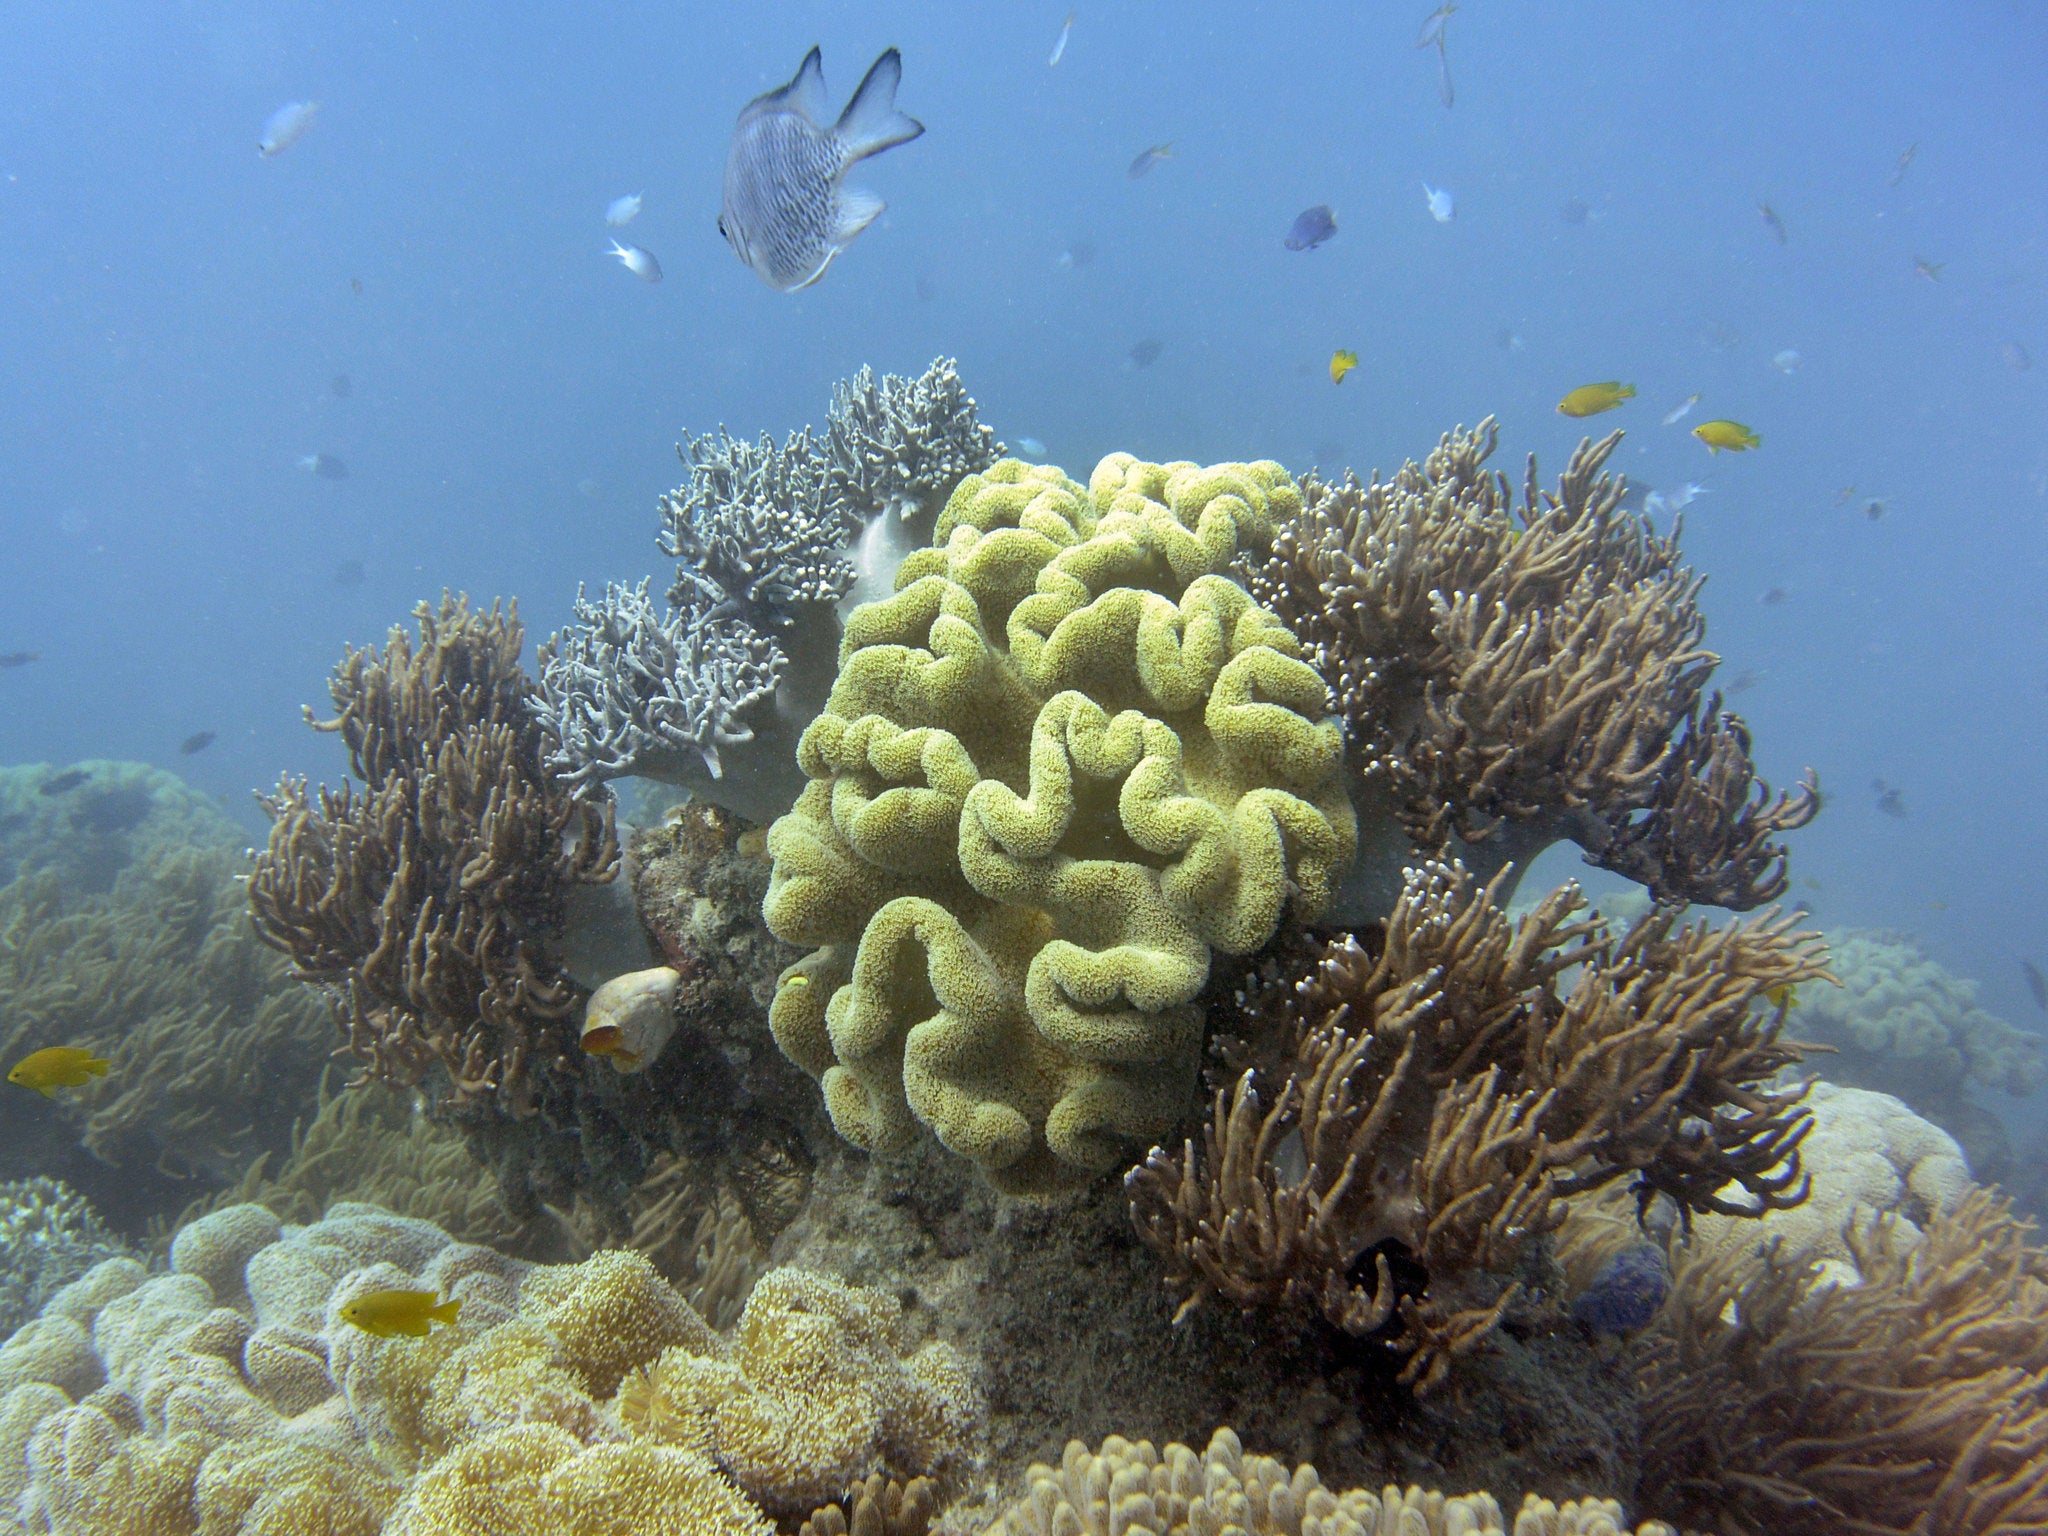 The fish of the Great Barrier Reef are in danger from growing sediment levels